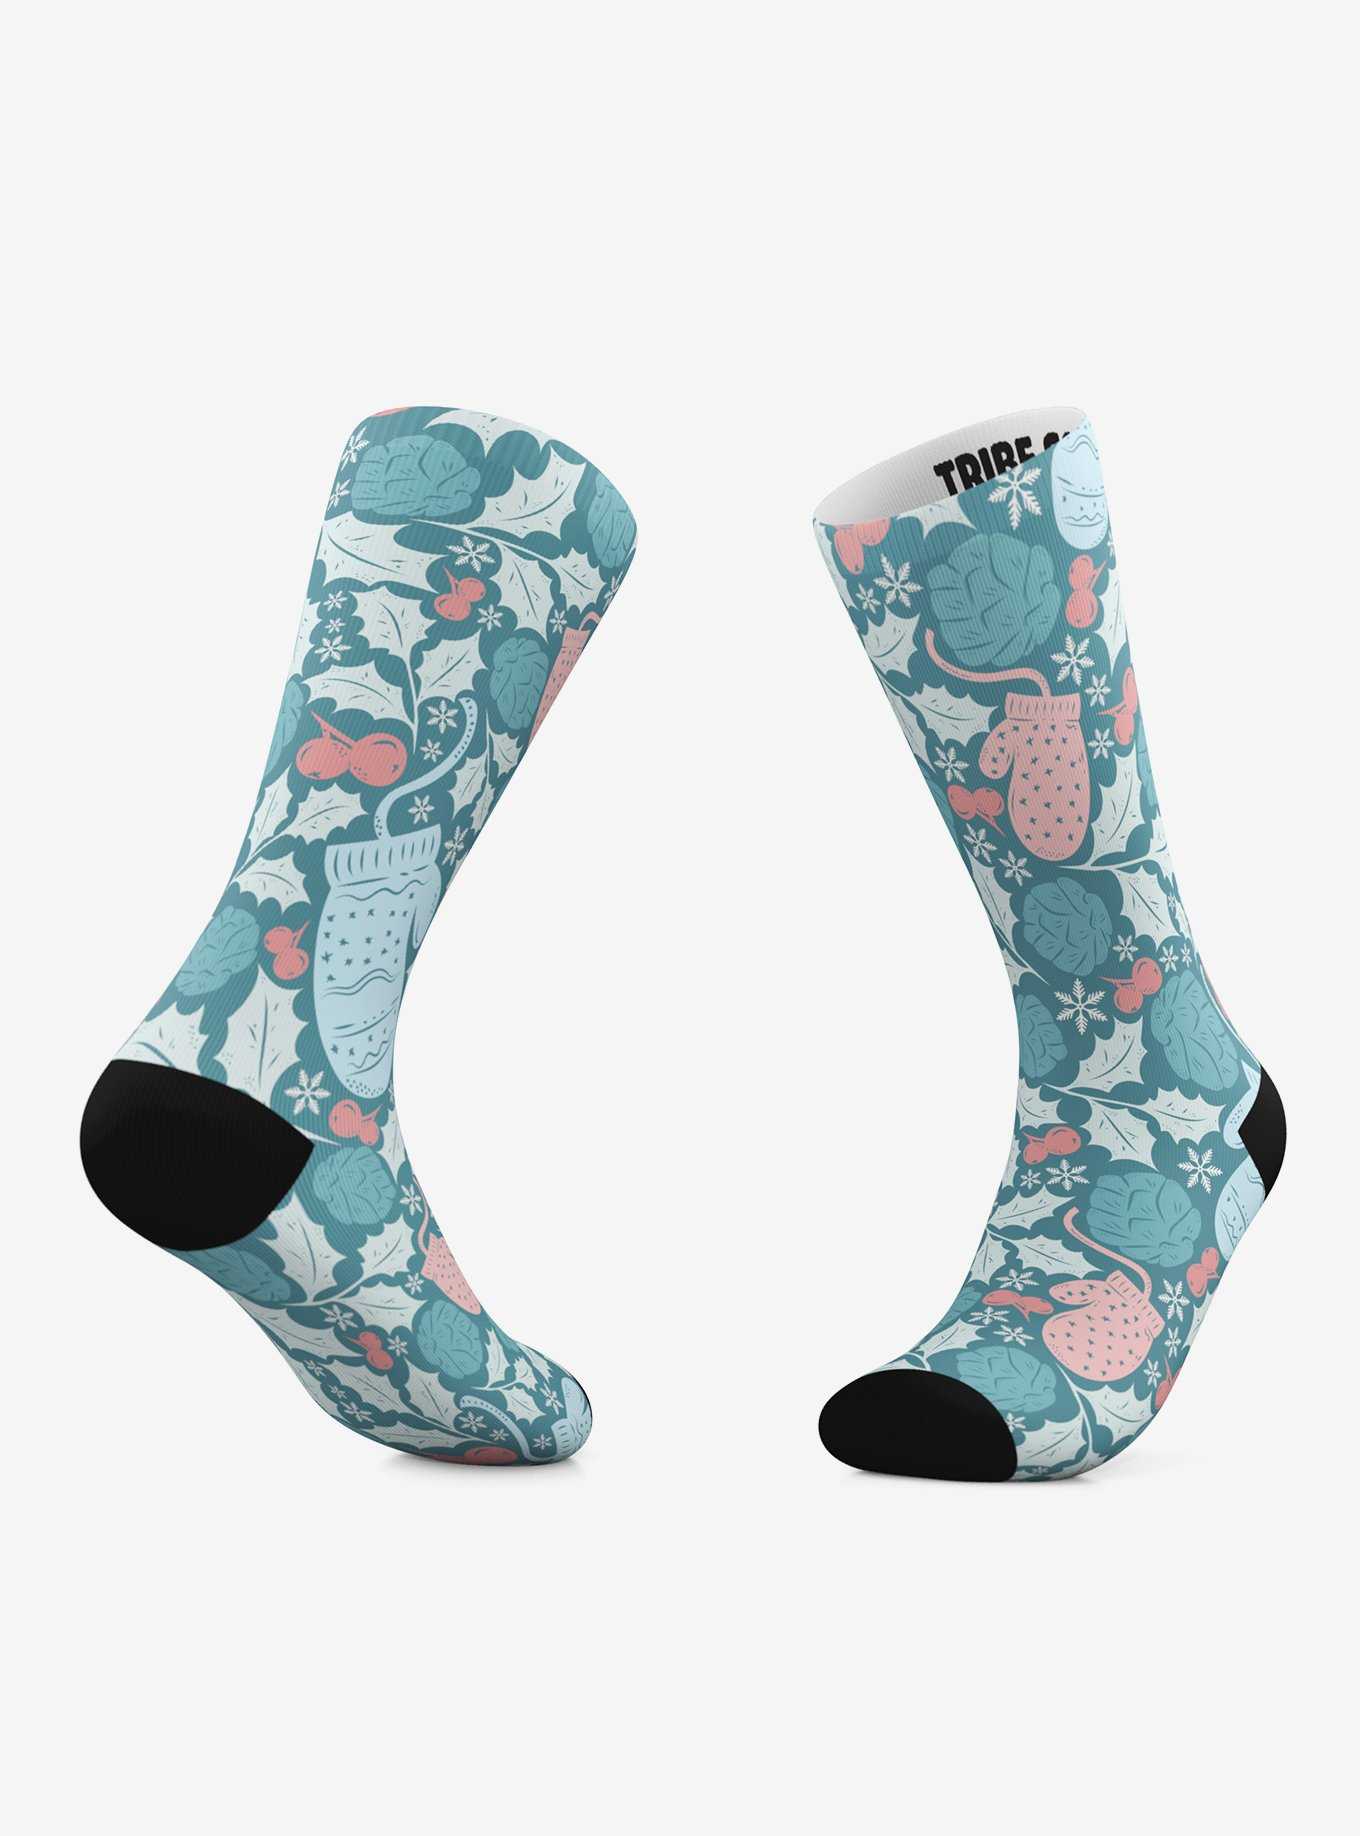 Winter Skater And Wintery Awesomeness Crew Socks 2 Pair, , hi-res